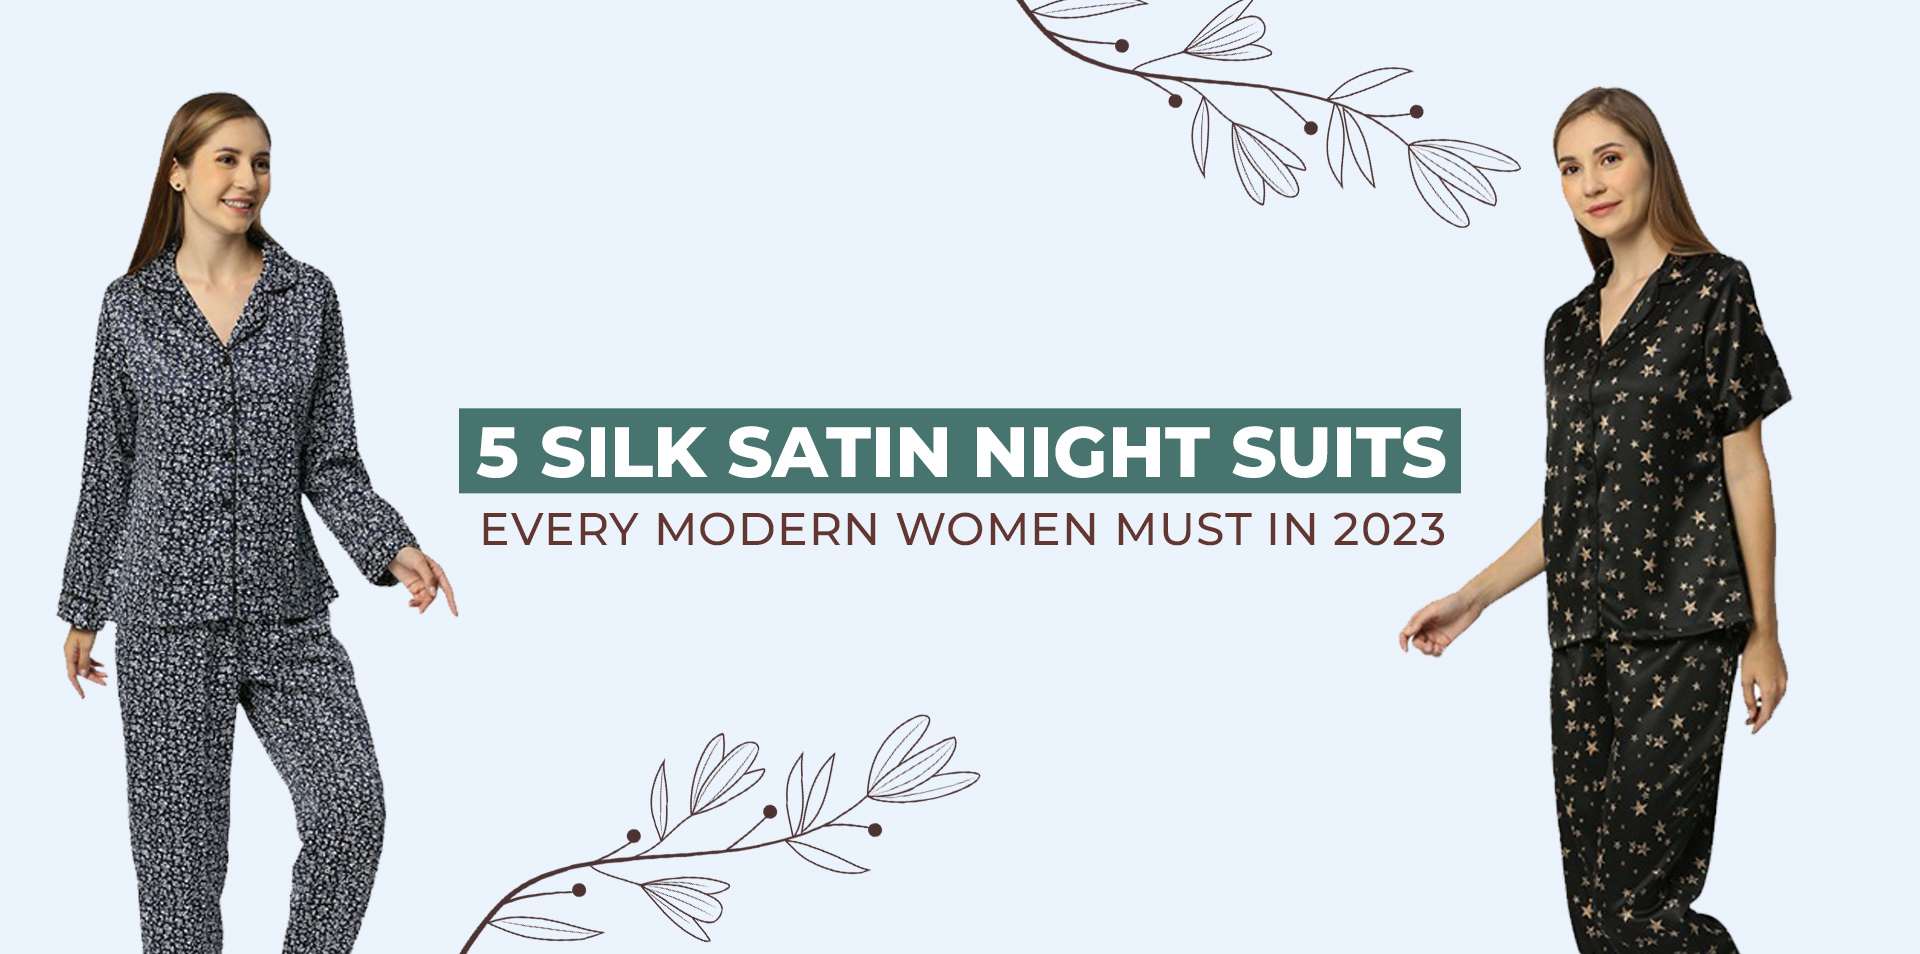 Silk Satin Night Suits Every Modern Woman Must Have in 2023